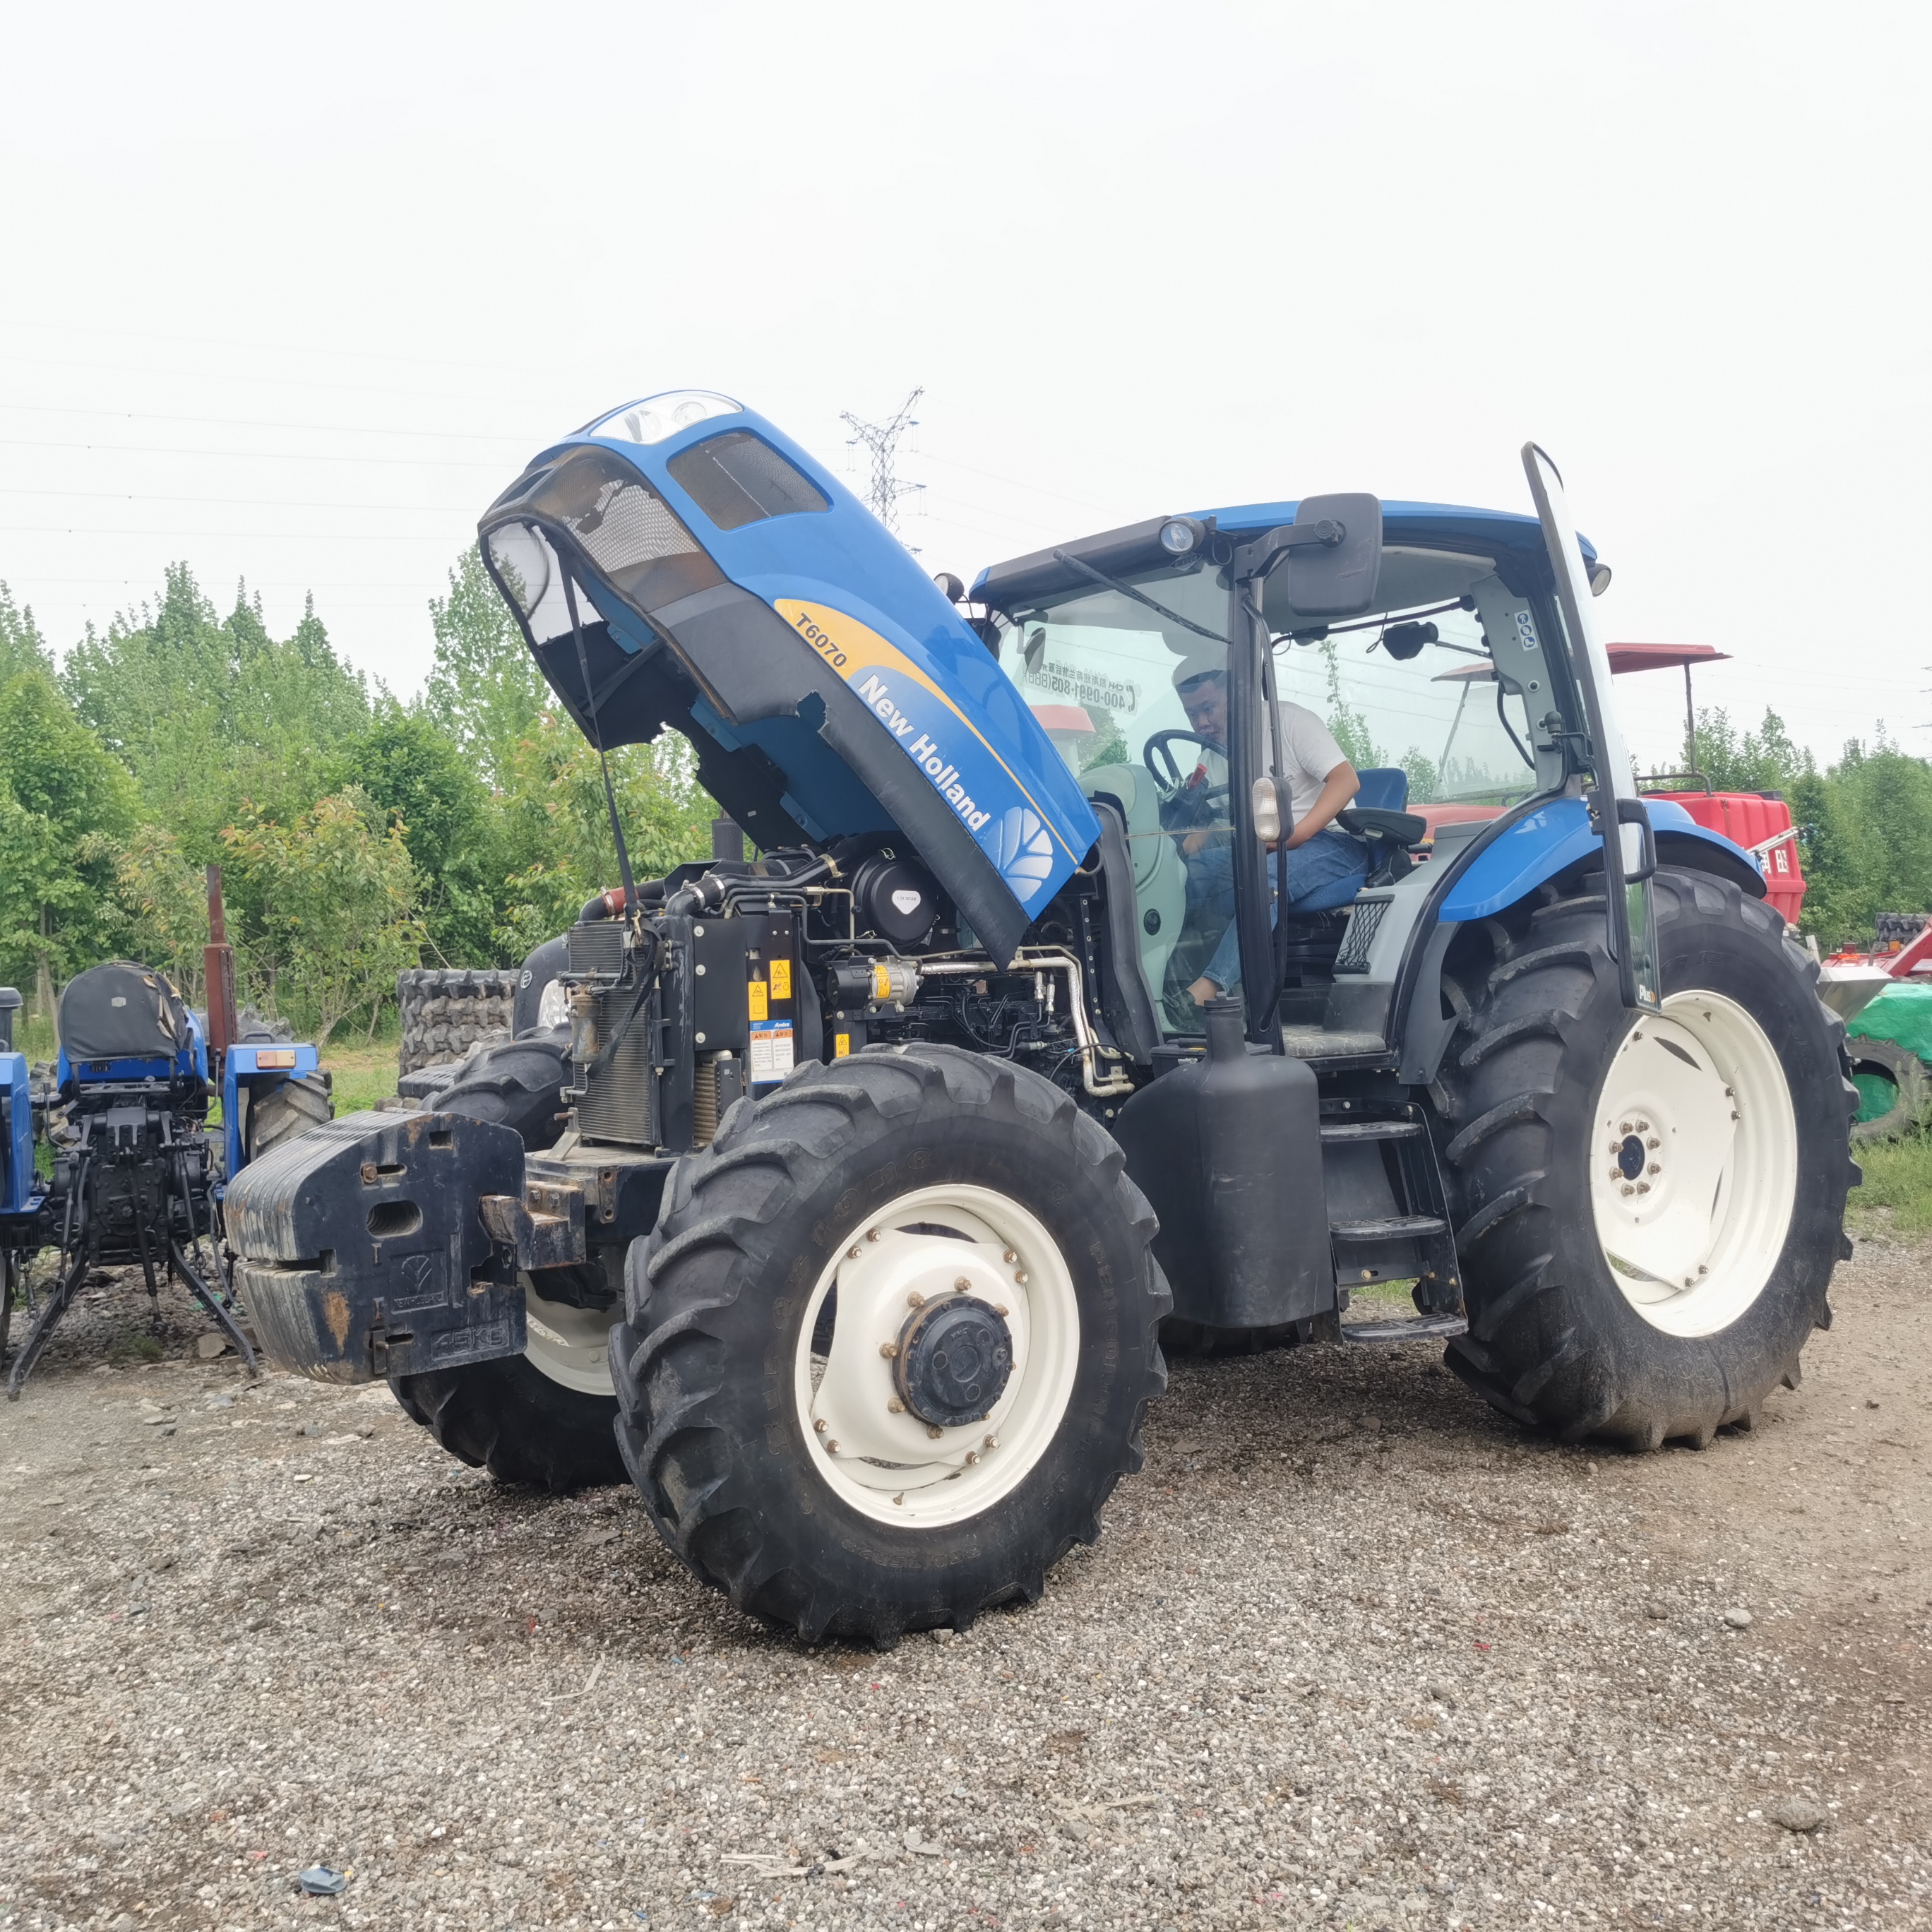 Second Hand used Newholland tractor T6070 140HP 4WD good quality for sale used newholland for sale 